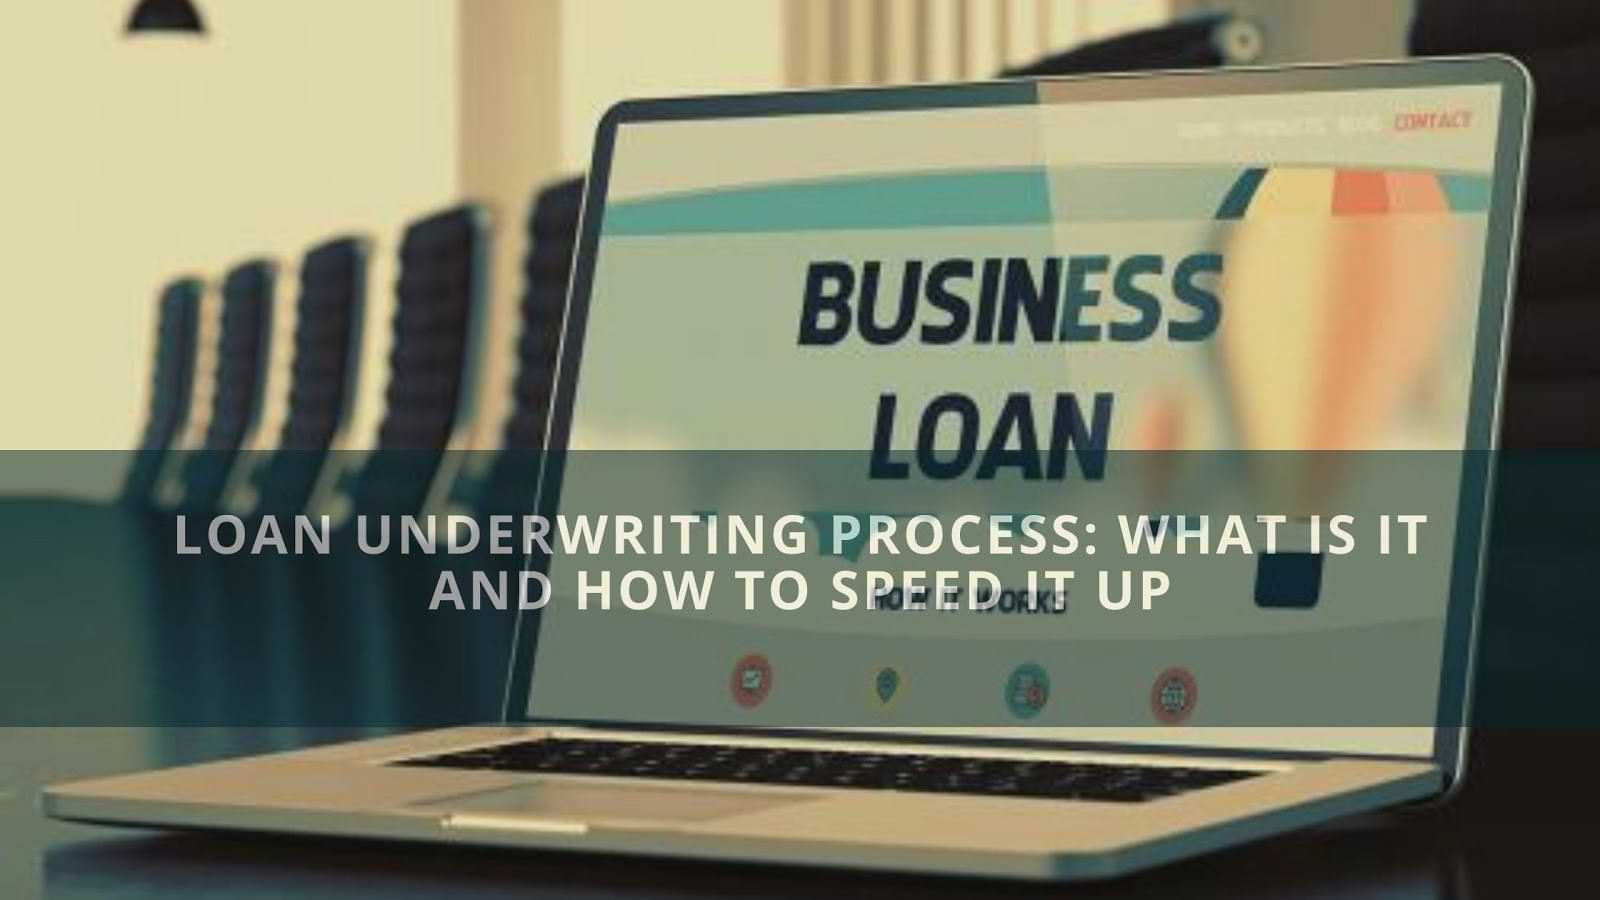 Loan Underwriting Process: What Is It And How To Speed It Up